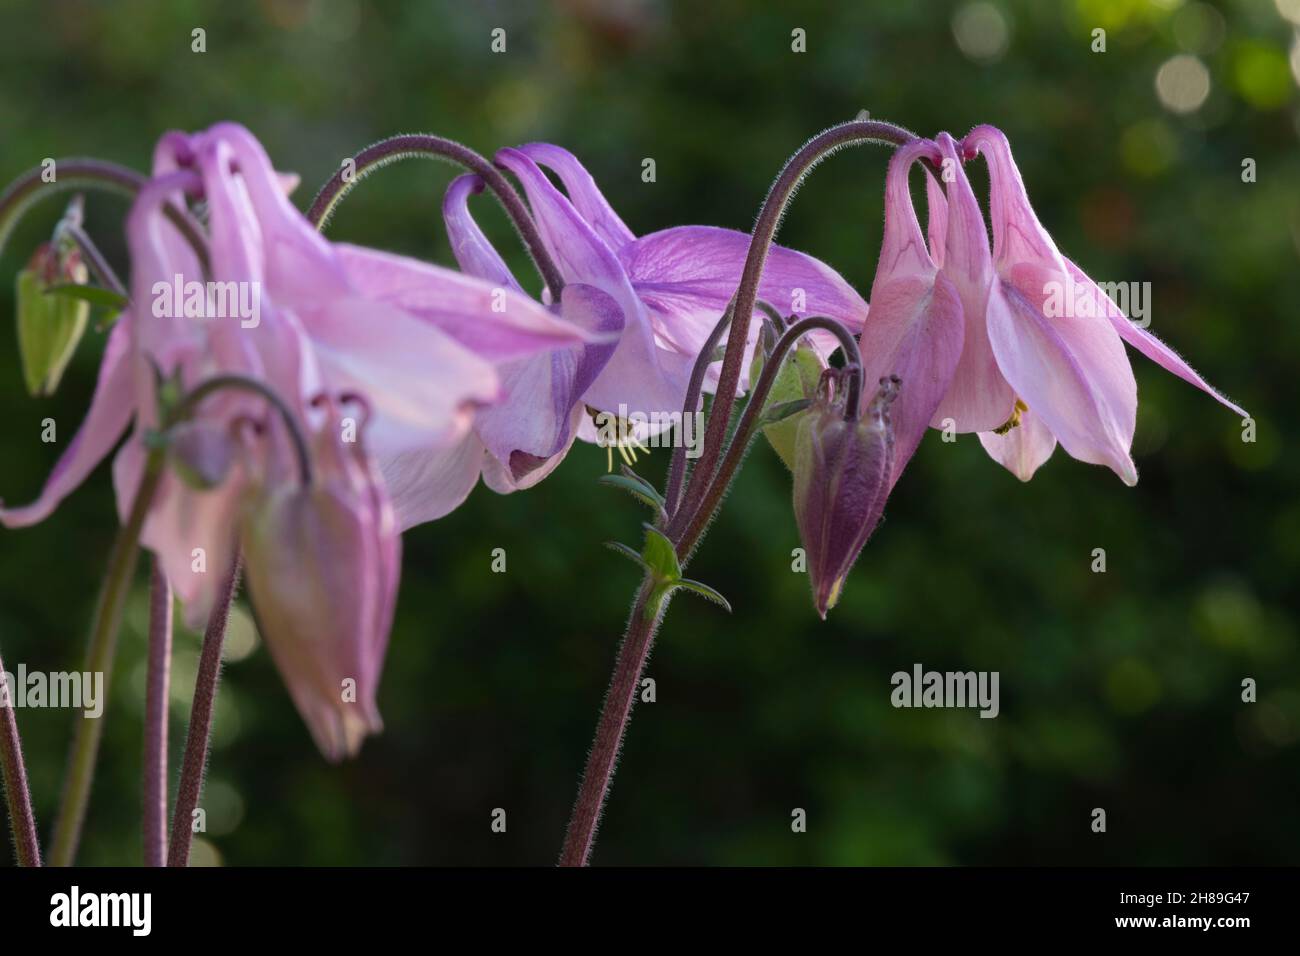 A Closeup of a Small Group of Pink & Mauve Granny's Bonnets (Aquilegia Vulgaris) Flower Heads in Sunshine Stock Photo